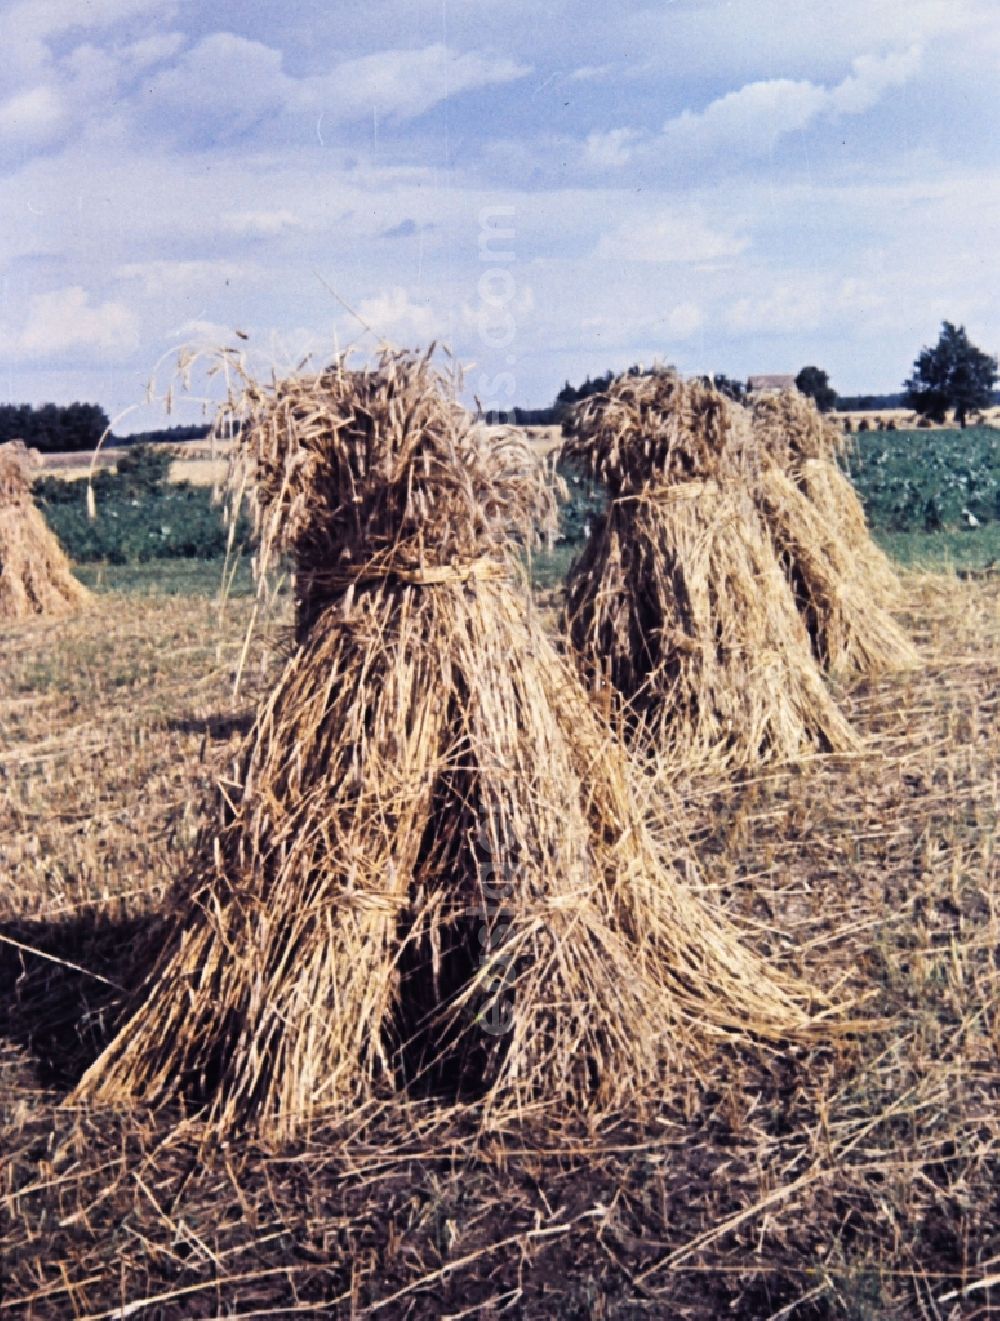 GDR image archive: Teicha - Farmers harvesting grain and sheaf laying on a harvested field in Teicha in the state Saxony on the territory of the former GDR, German Democratic Republic